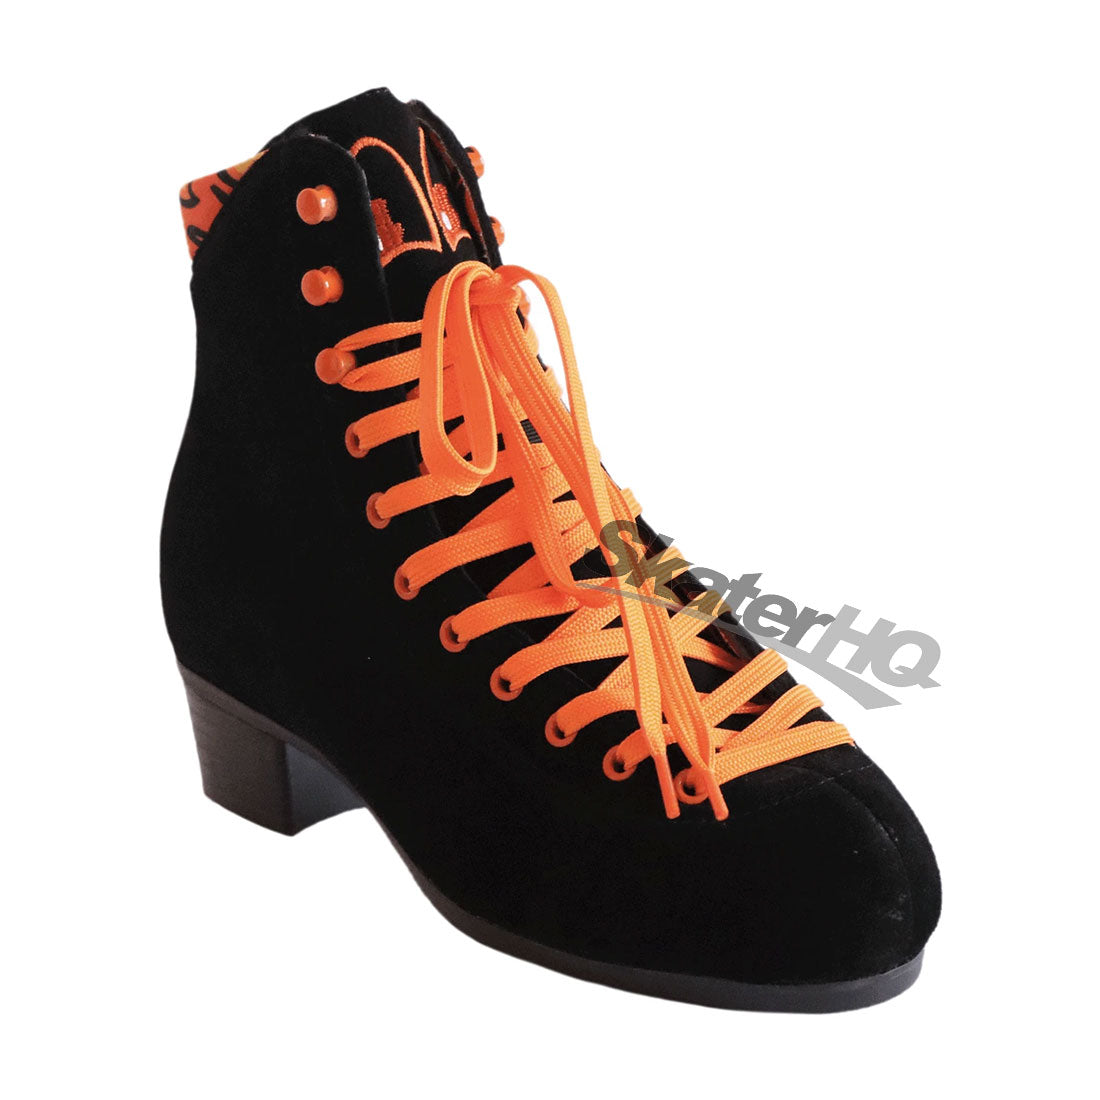 Chuffed Boot - Fuegote Black 9US Roller Skate Boots